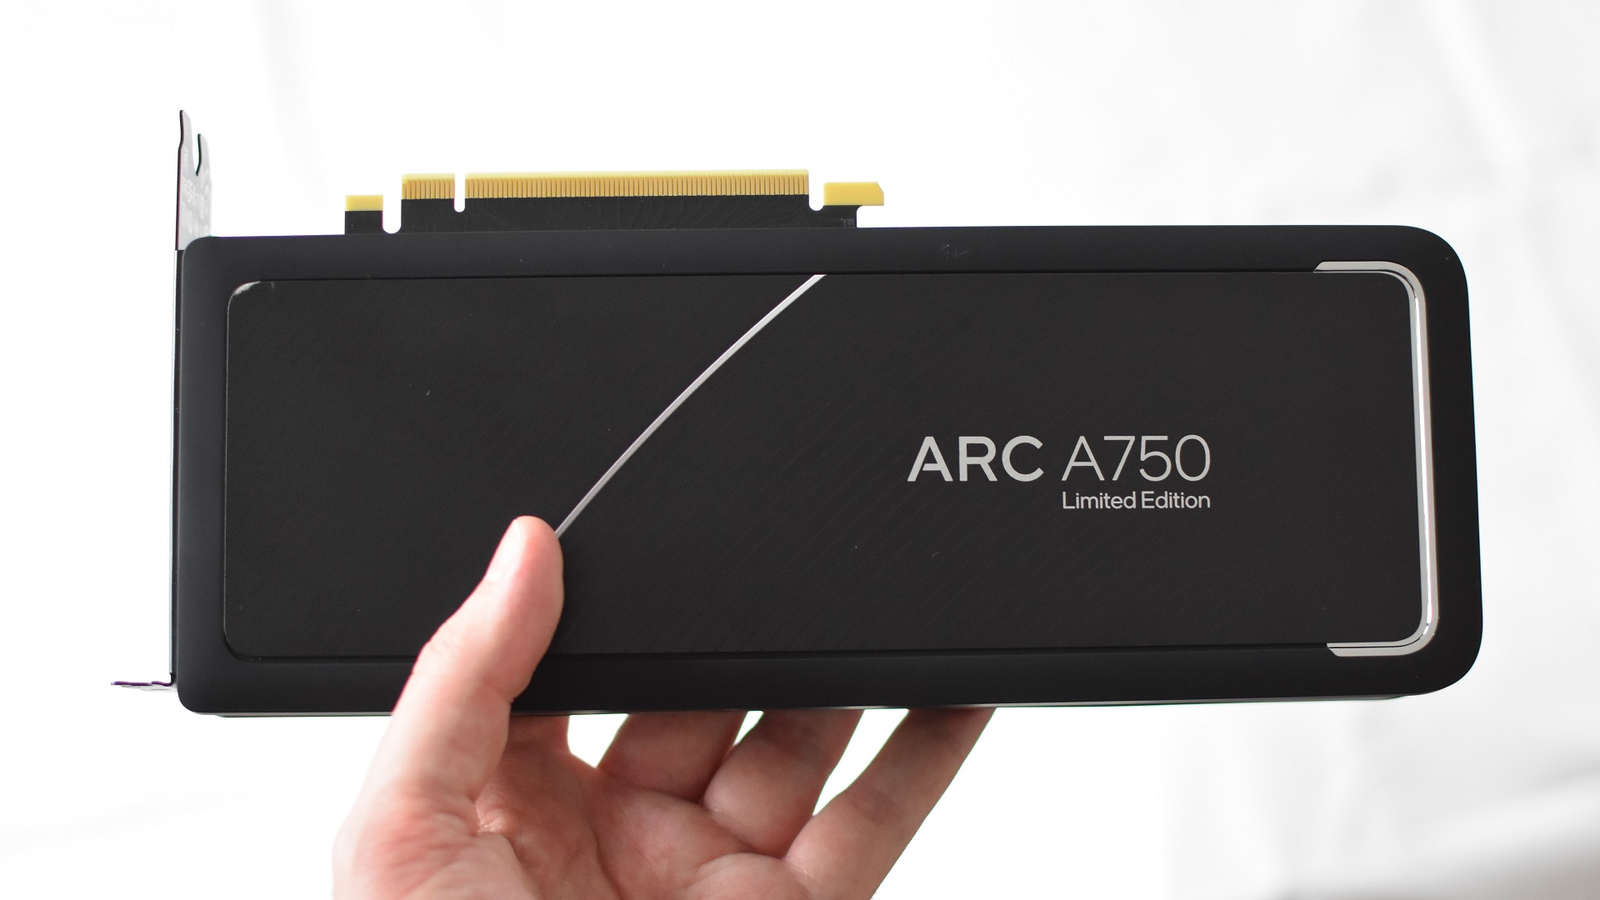 Intel Arc A750 review: Intel's cheap graphics card comes good